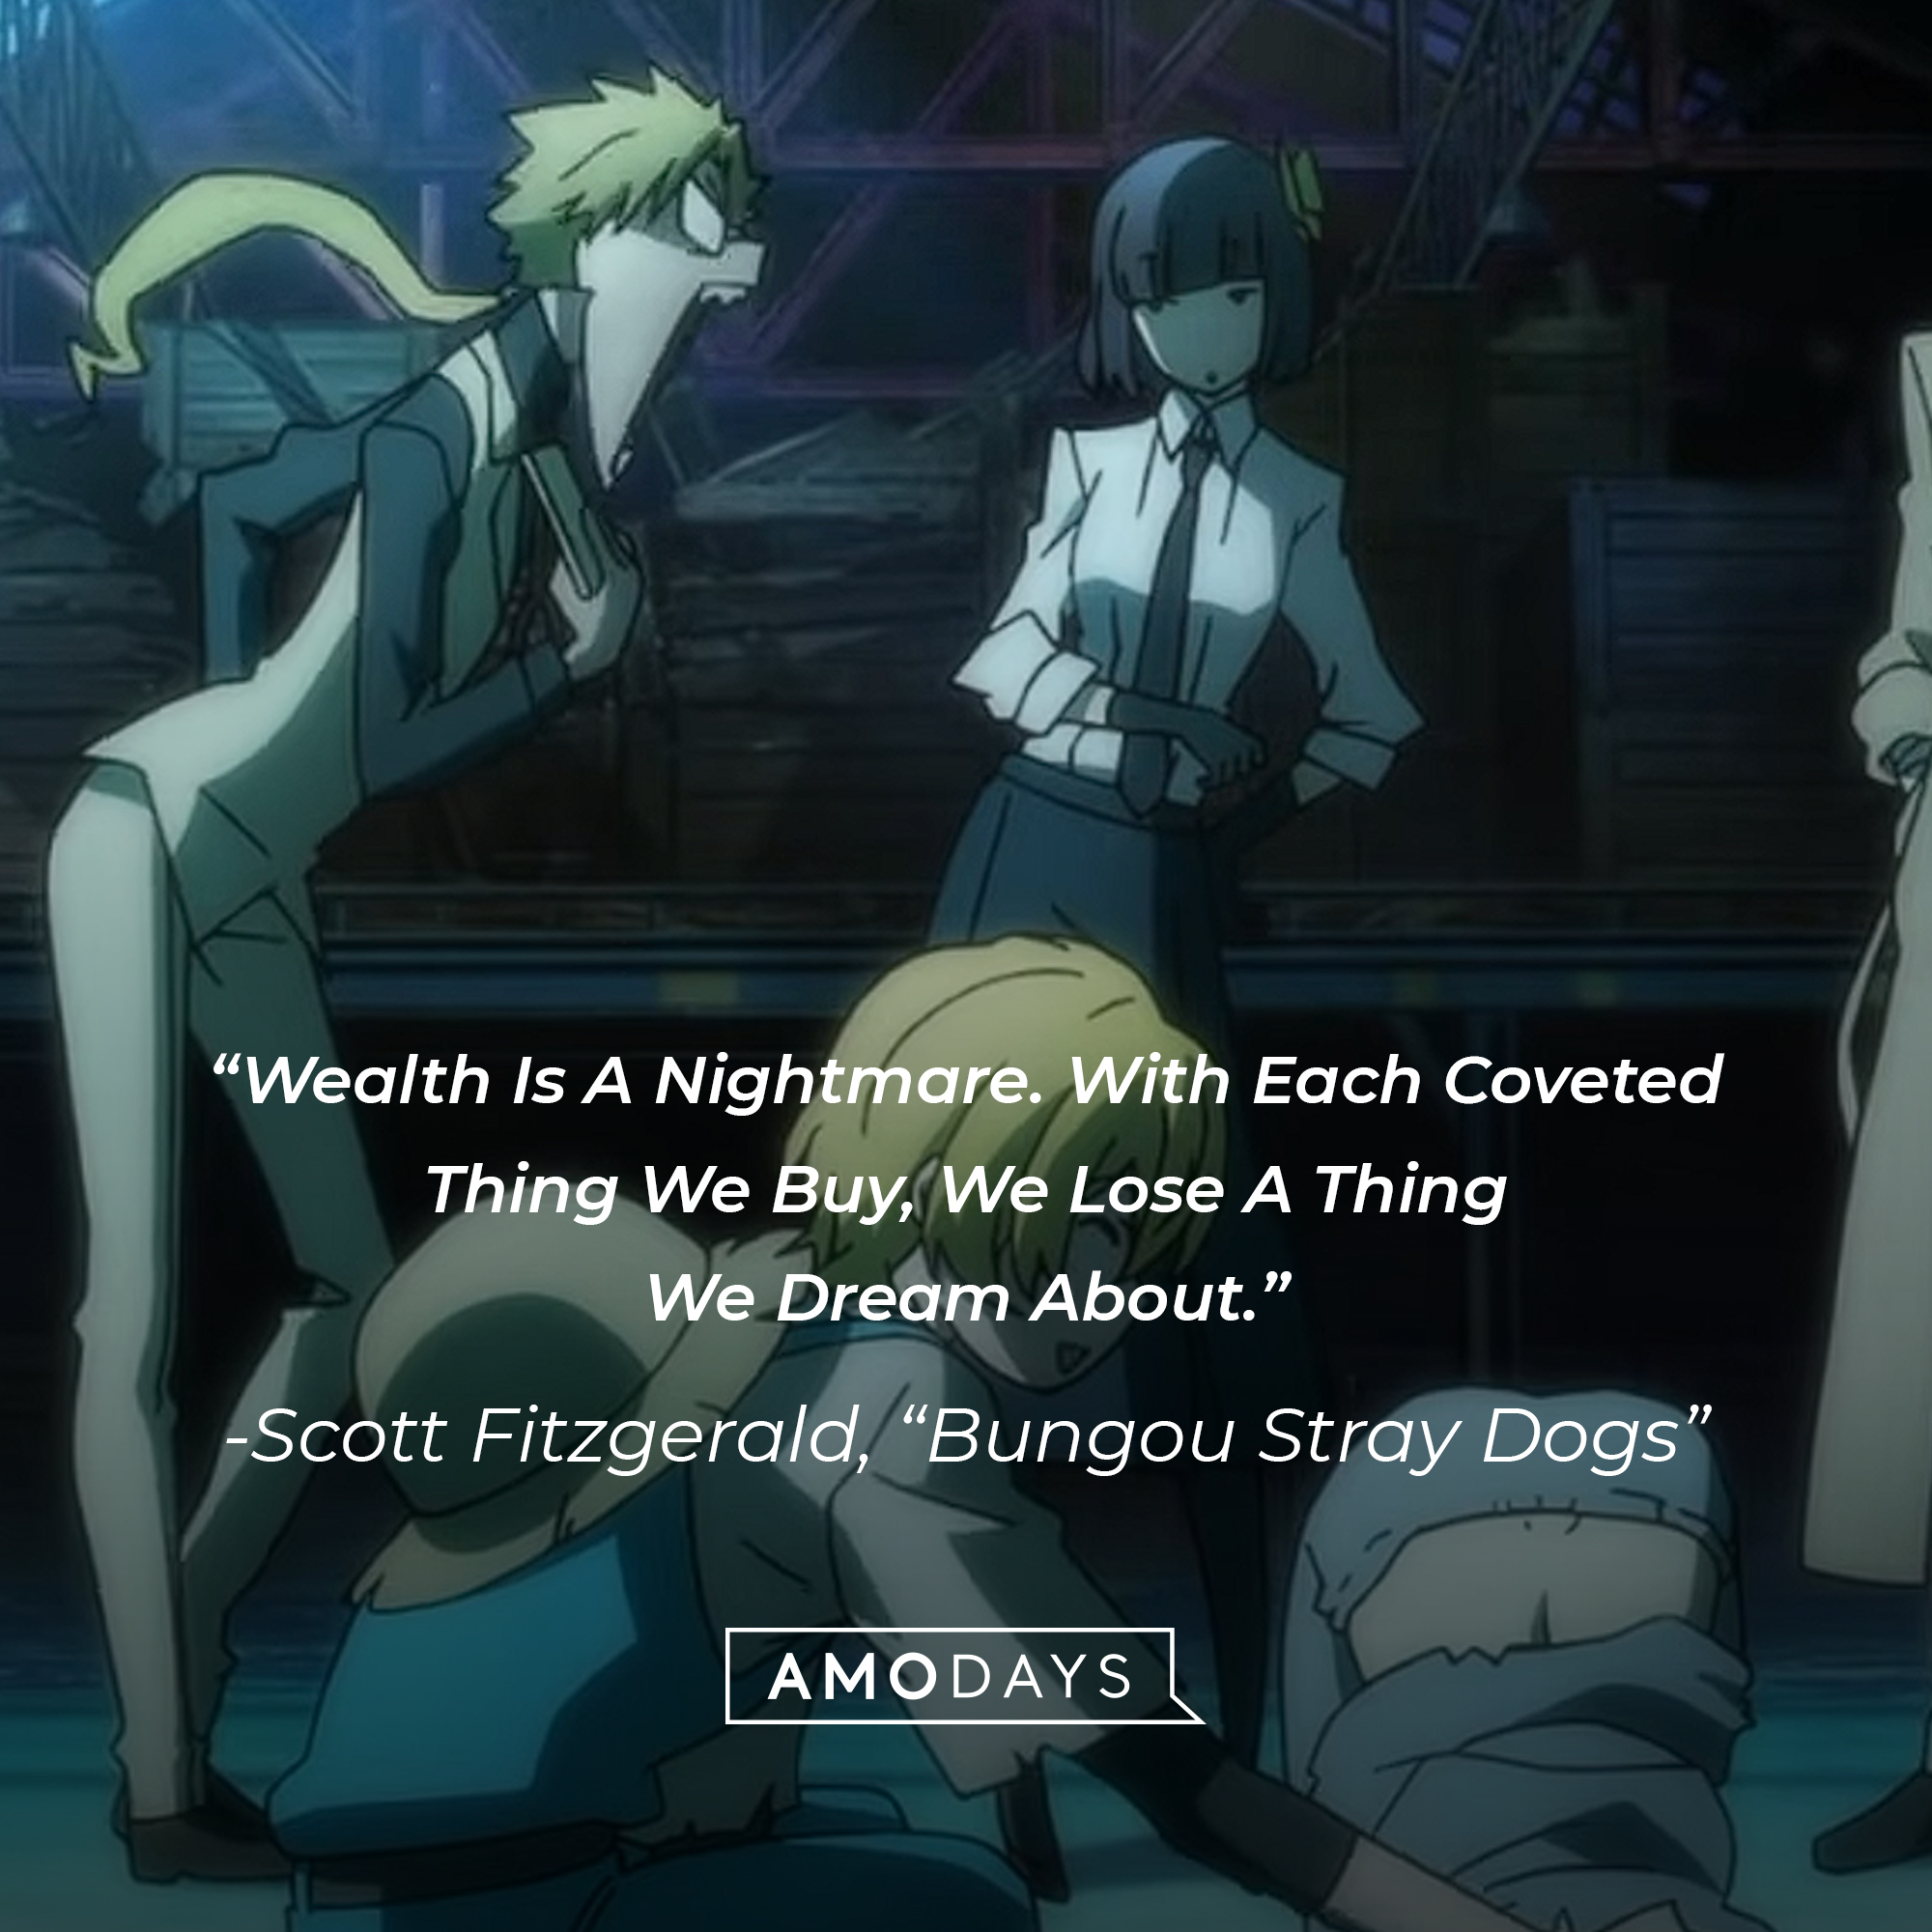 Scott Fitzgerald's quote: "Wealth Is A Nightmare. With Each Coveted Thing We Buy, We Lose A Thing We Dream About." | Image: youtube.com/Crunchyroll Collection